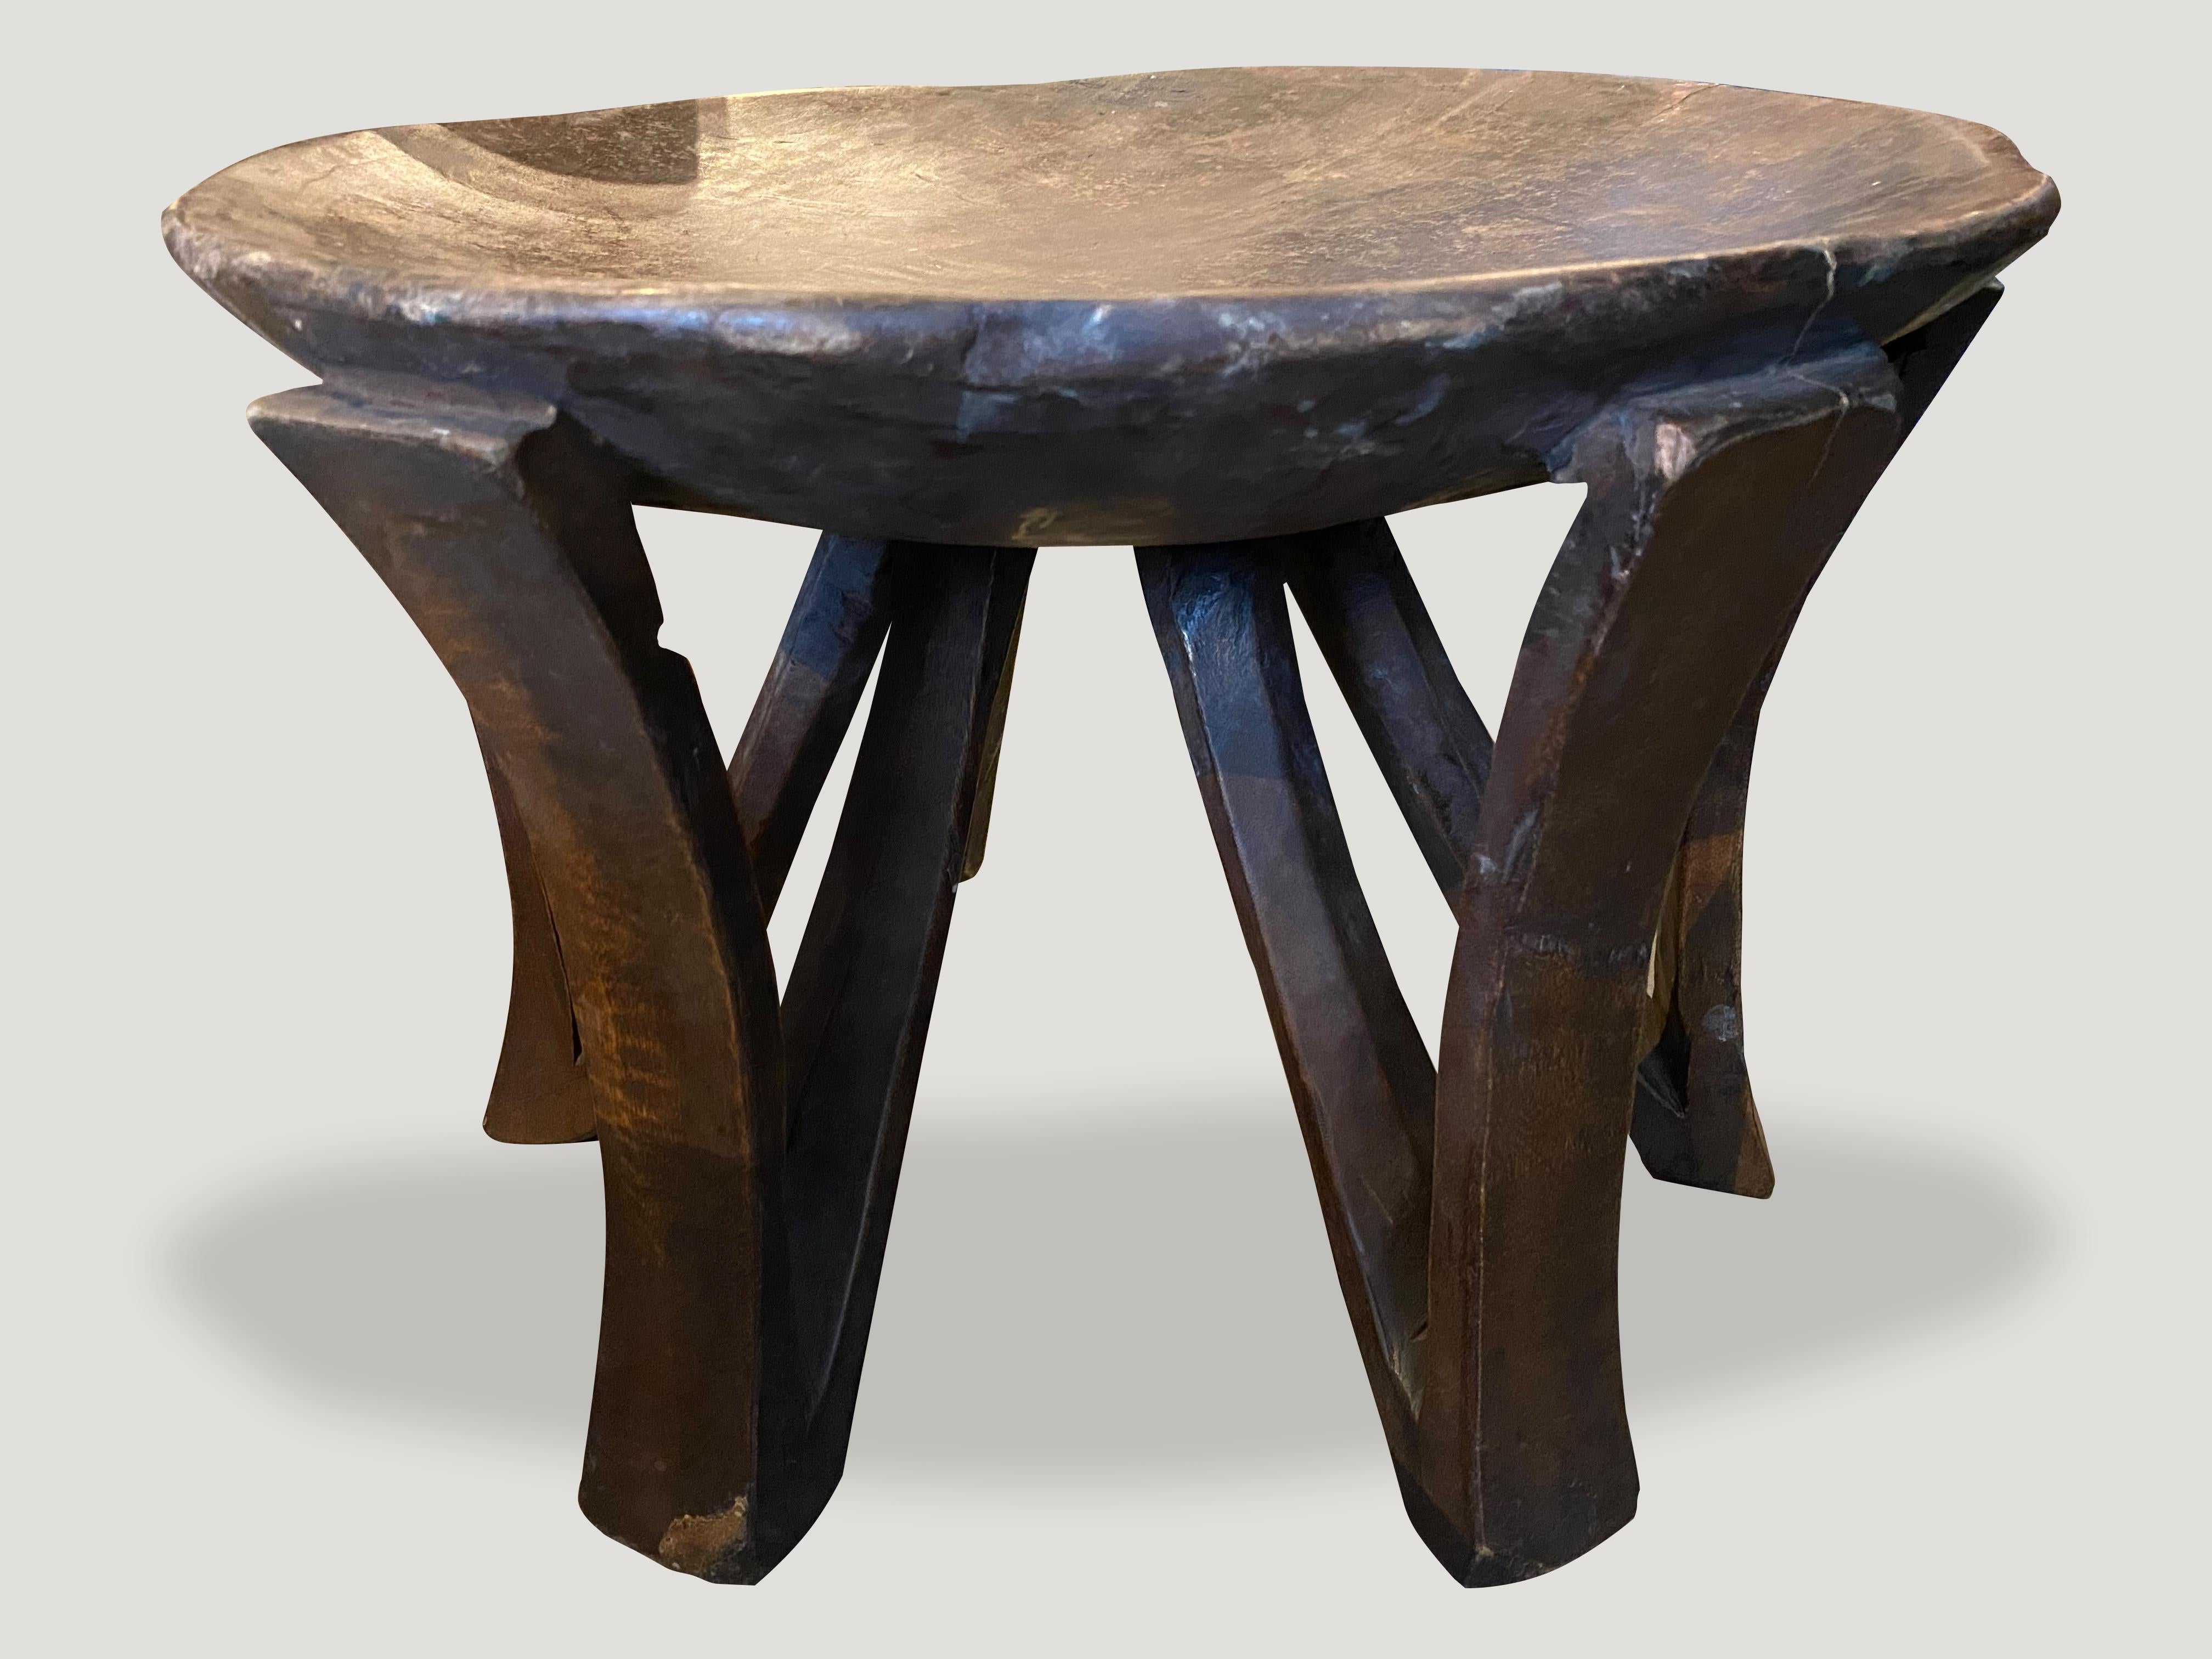 Tribal Andrianna Shamaris Antique Mahogany Wood African Sculptural Side Table or Bowl